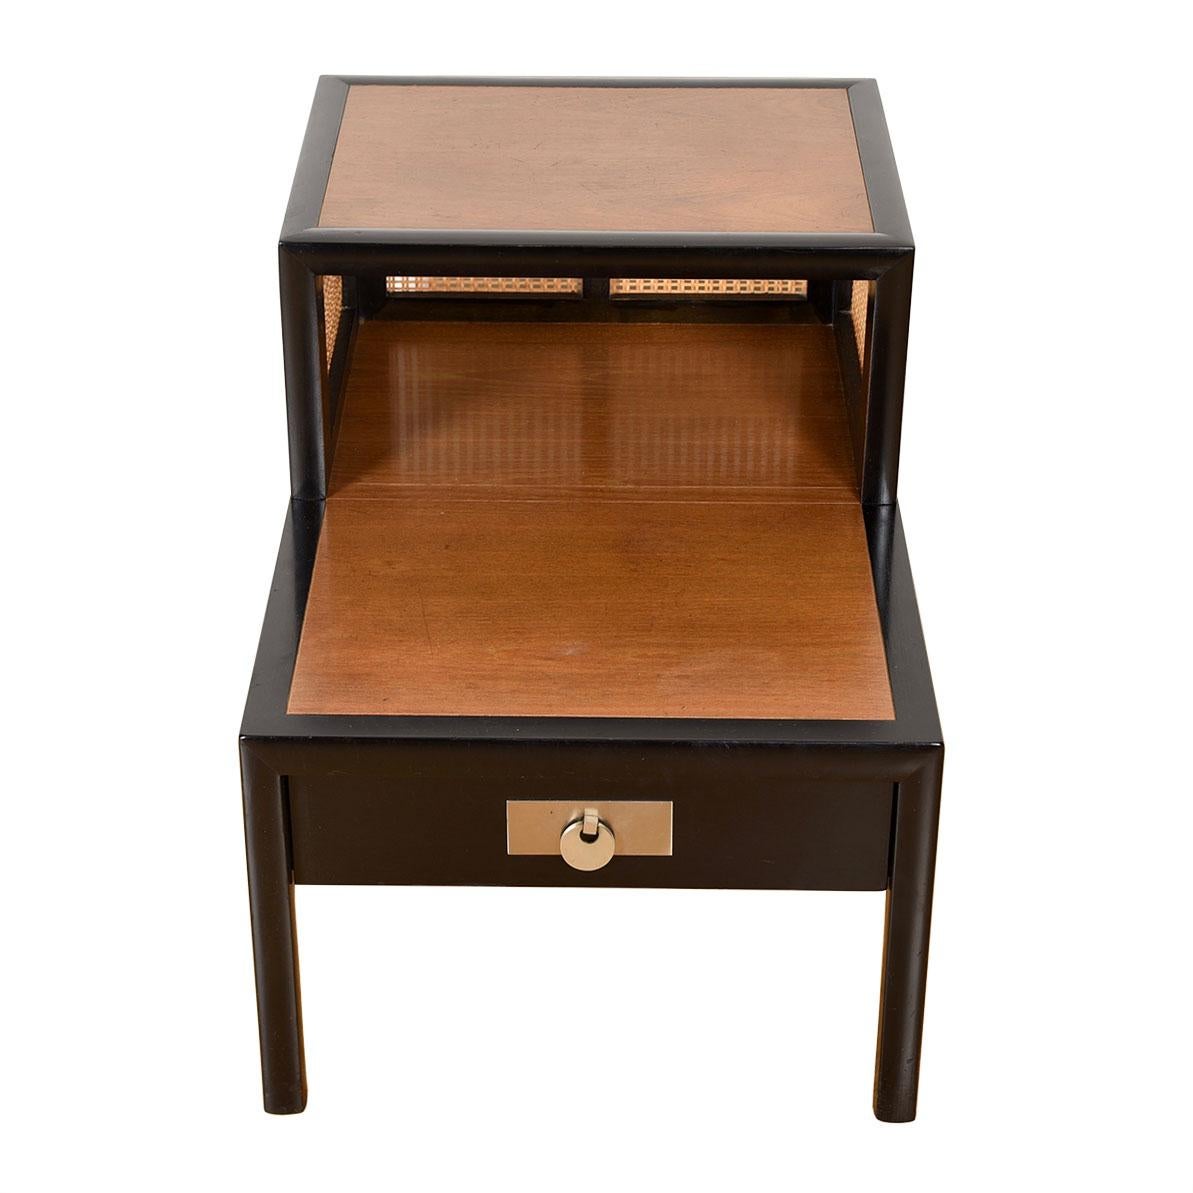 Baker midcentury Decorator Black Lacquer + Cane Step Side Table

Additional information:
Material: Lacquer
Featured at Kensington:
Bi-level side table by baker from their asian line
Black lacquer frame accented by wood table surfaces and cane